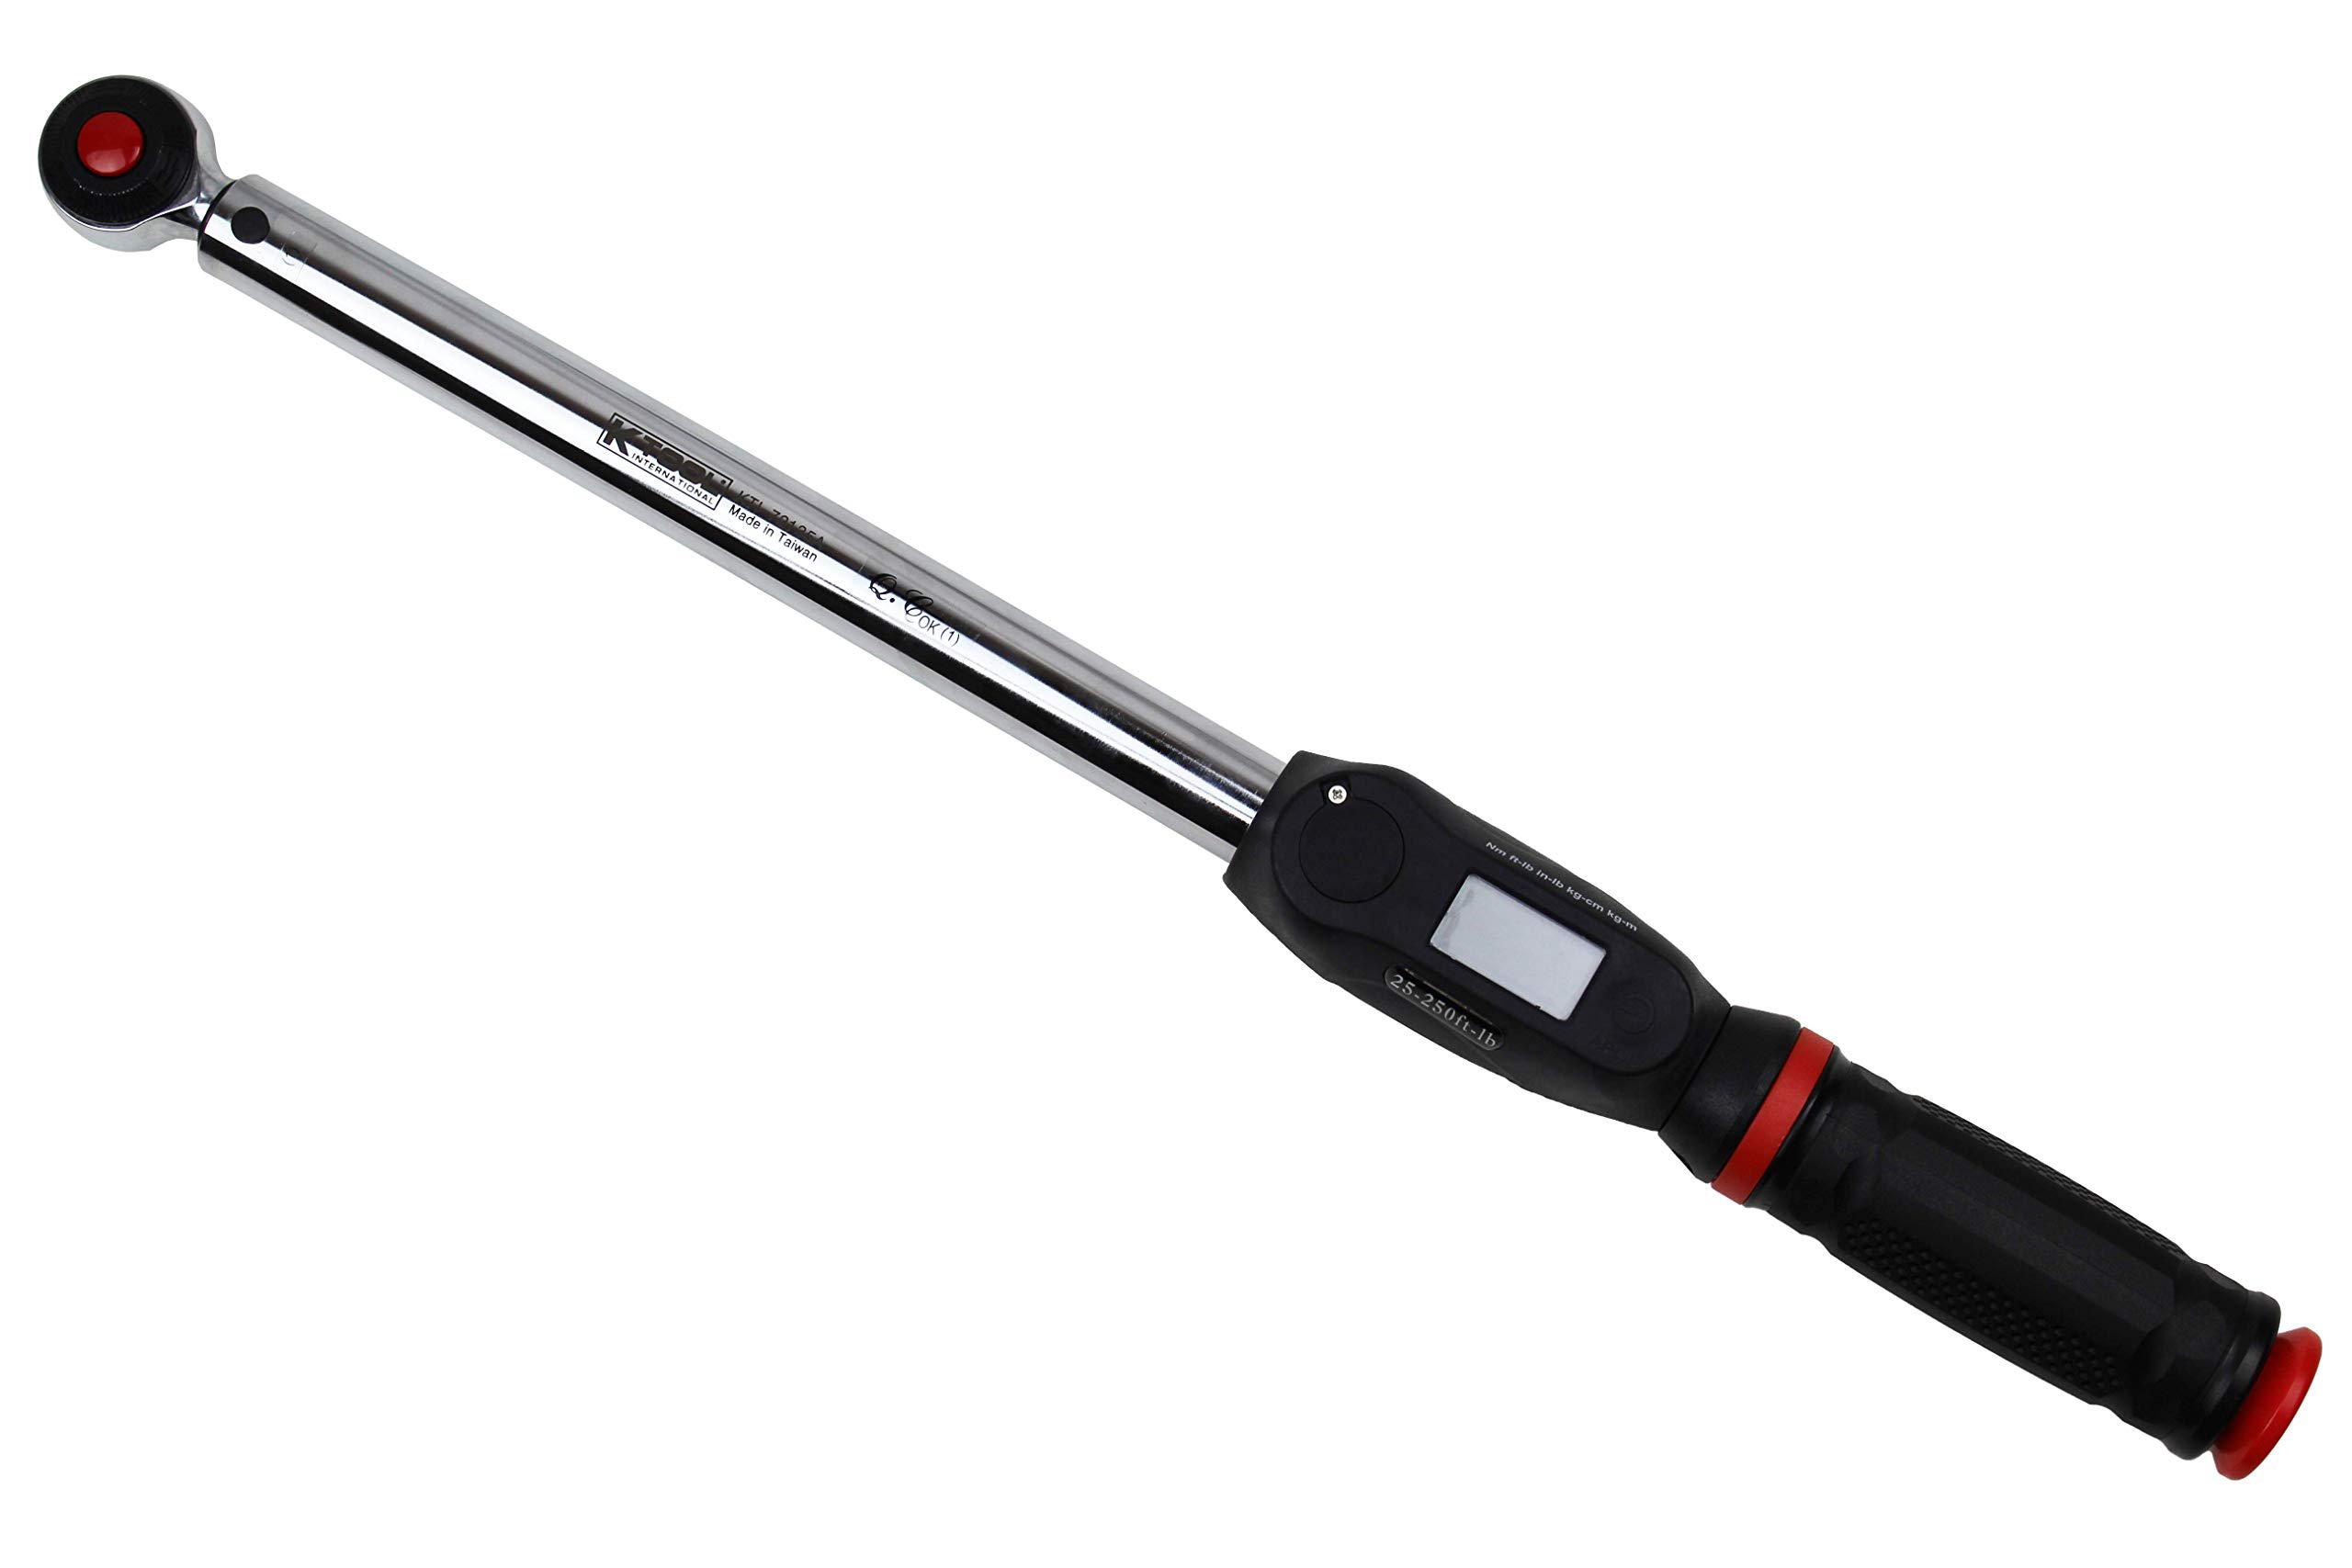 k tool international digital torque wrench 1/2" drive 25-250 ft/lbs, only 3.3 lbs, warranty included; kti72135a